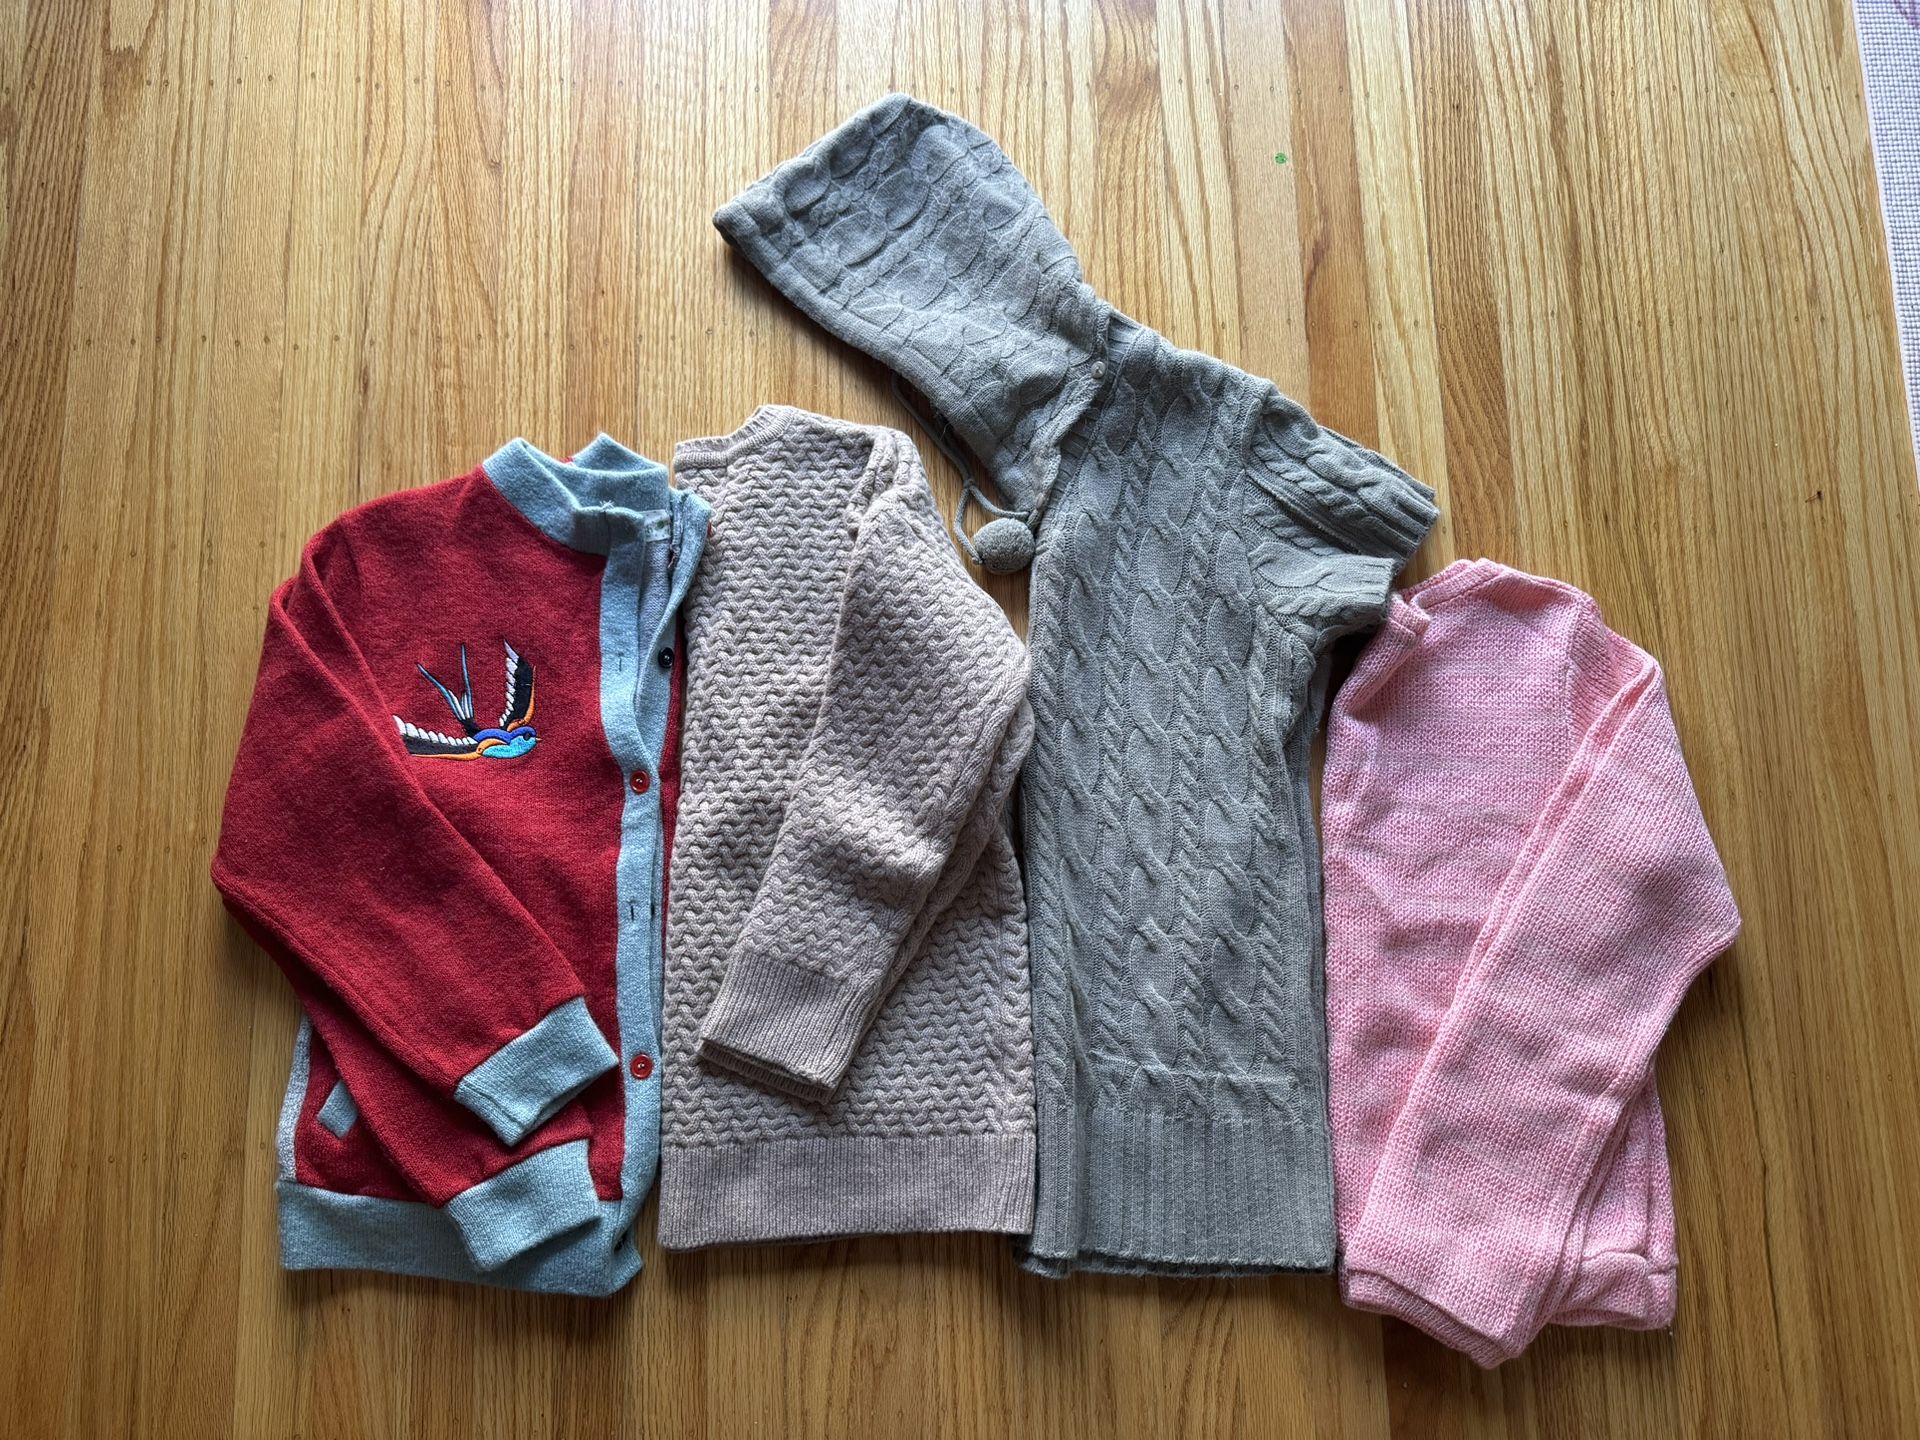 womens sweater cardigan clothes bundle Size: M Worn only once